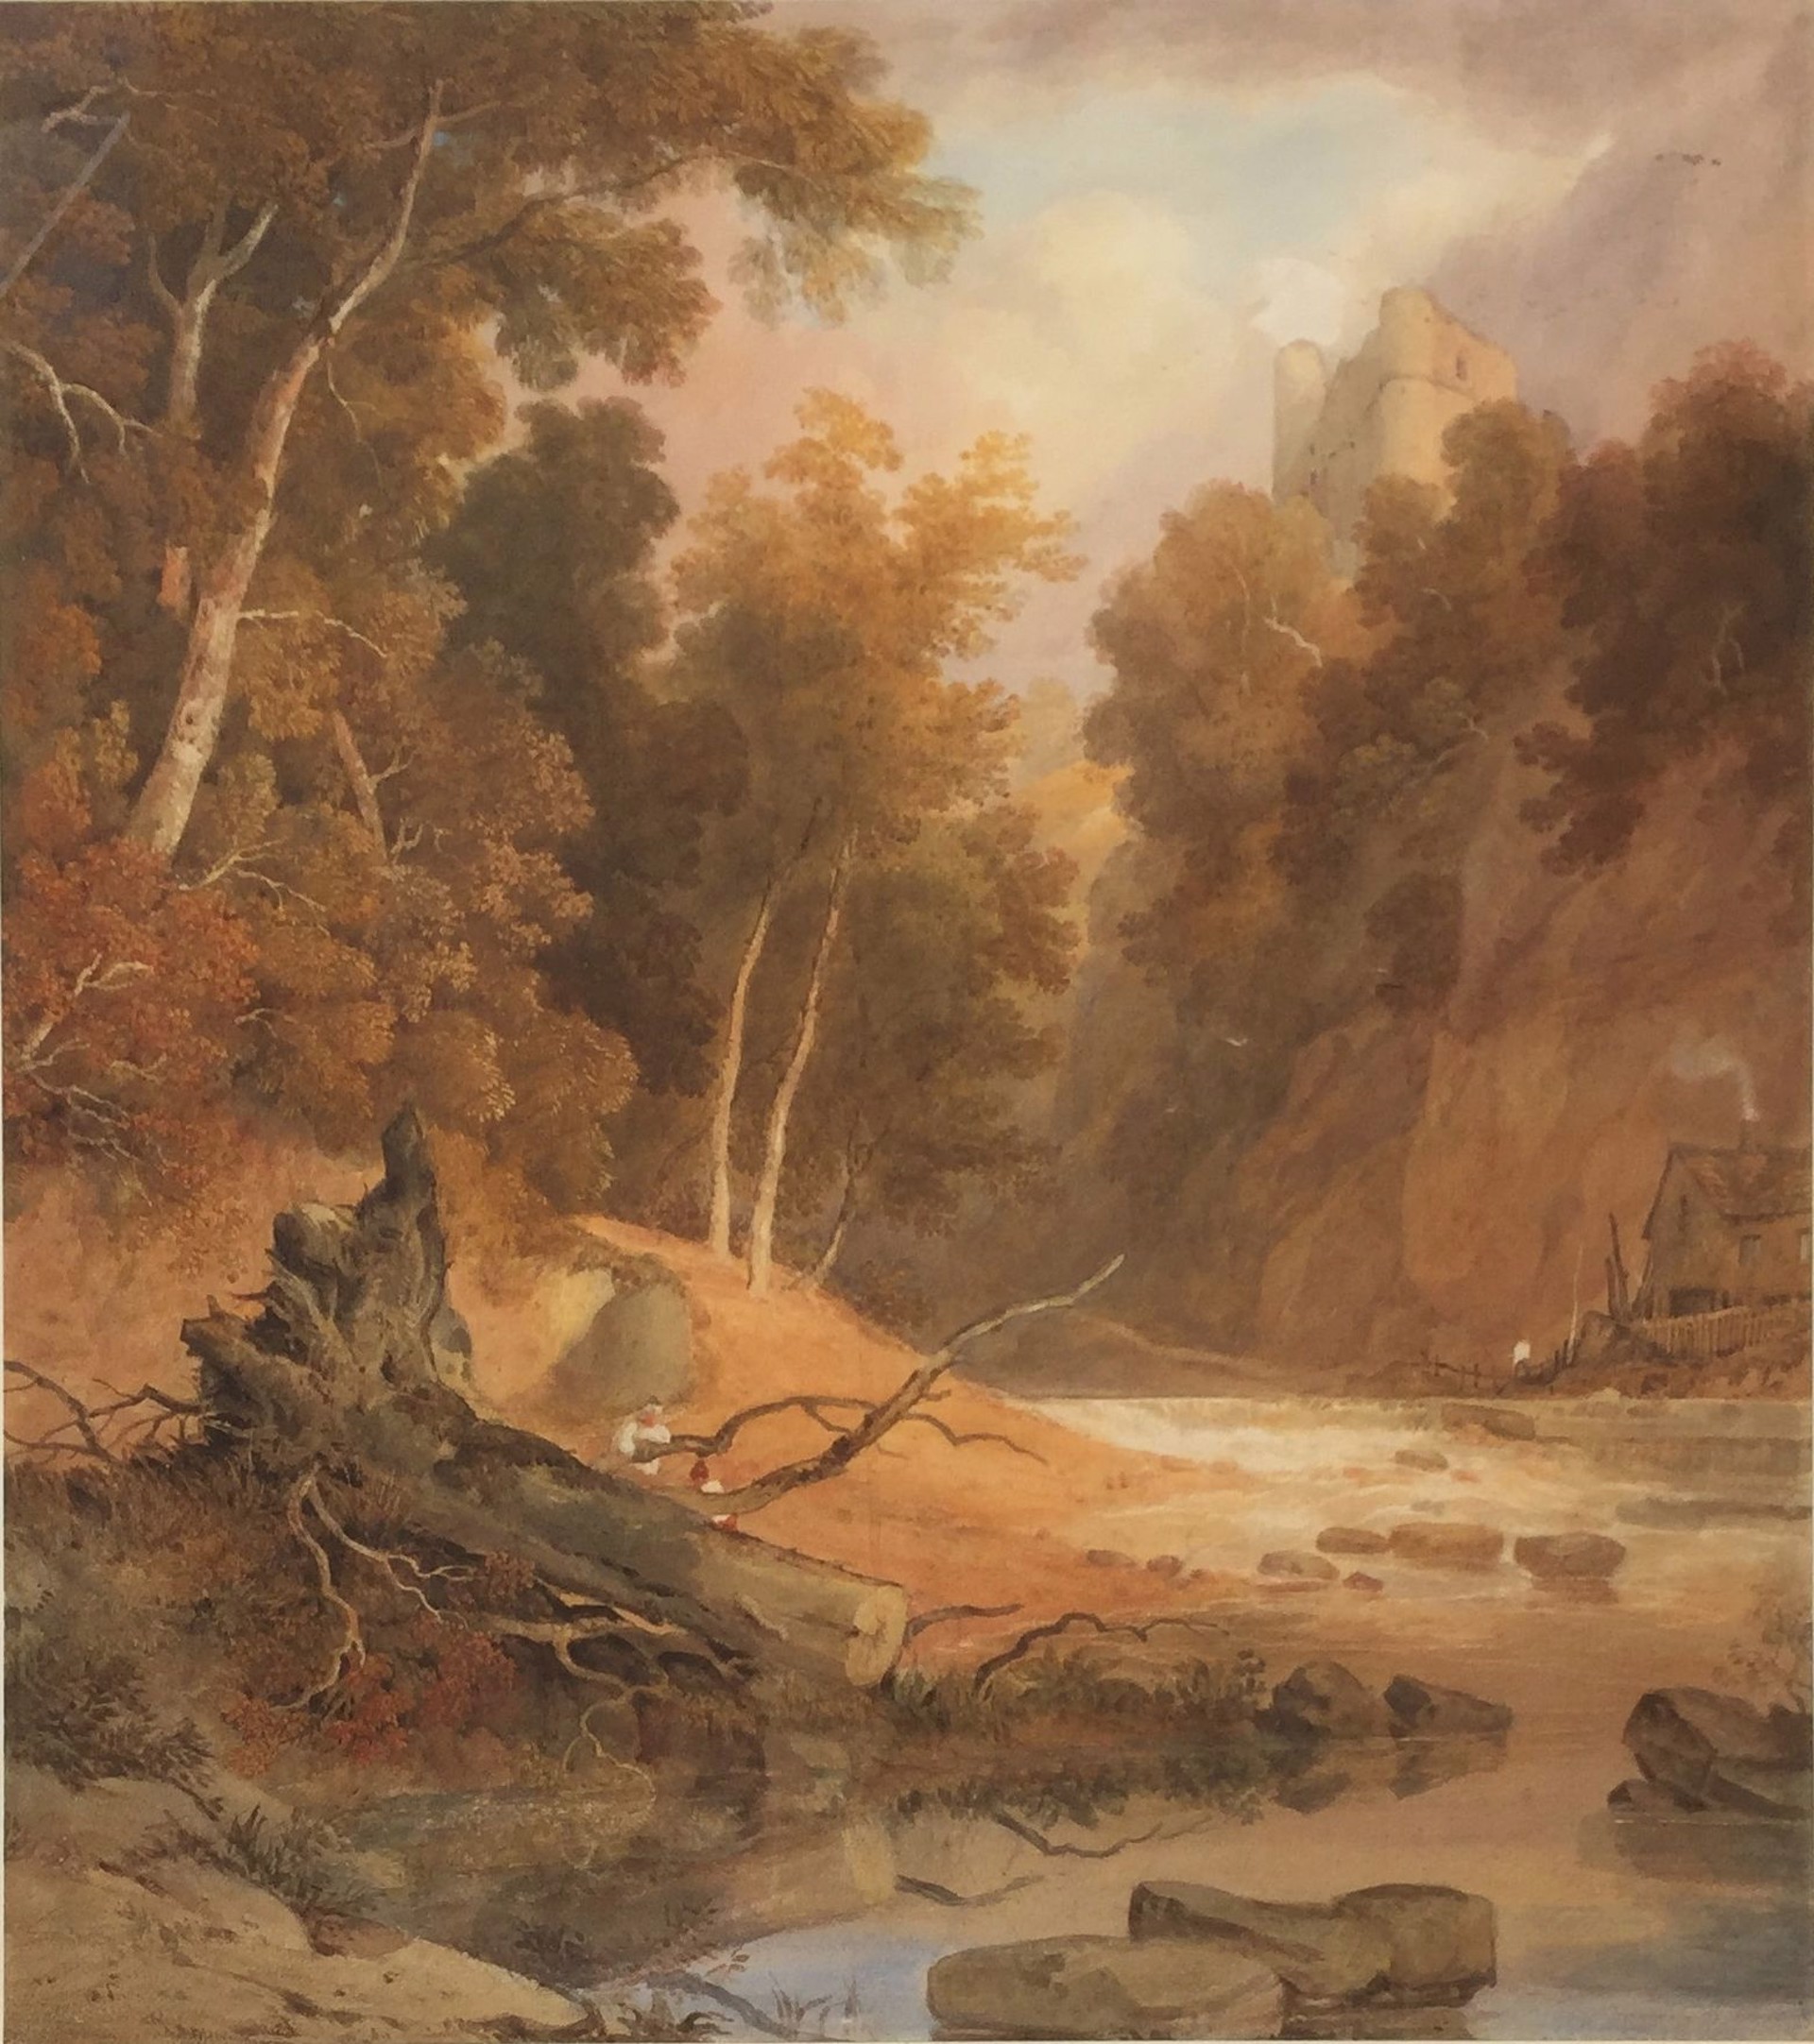 Landscape with Fallen Tree by William Havell (1782-1857)